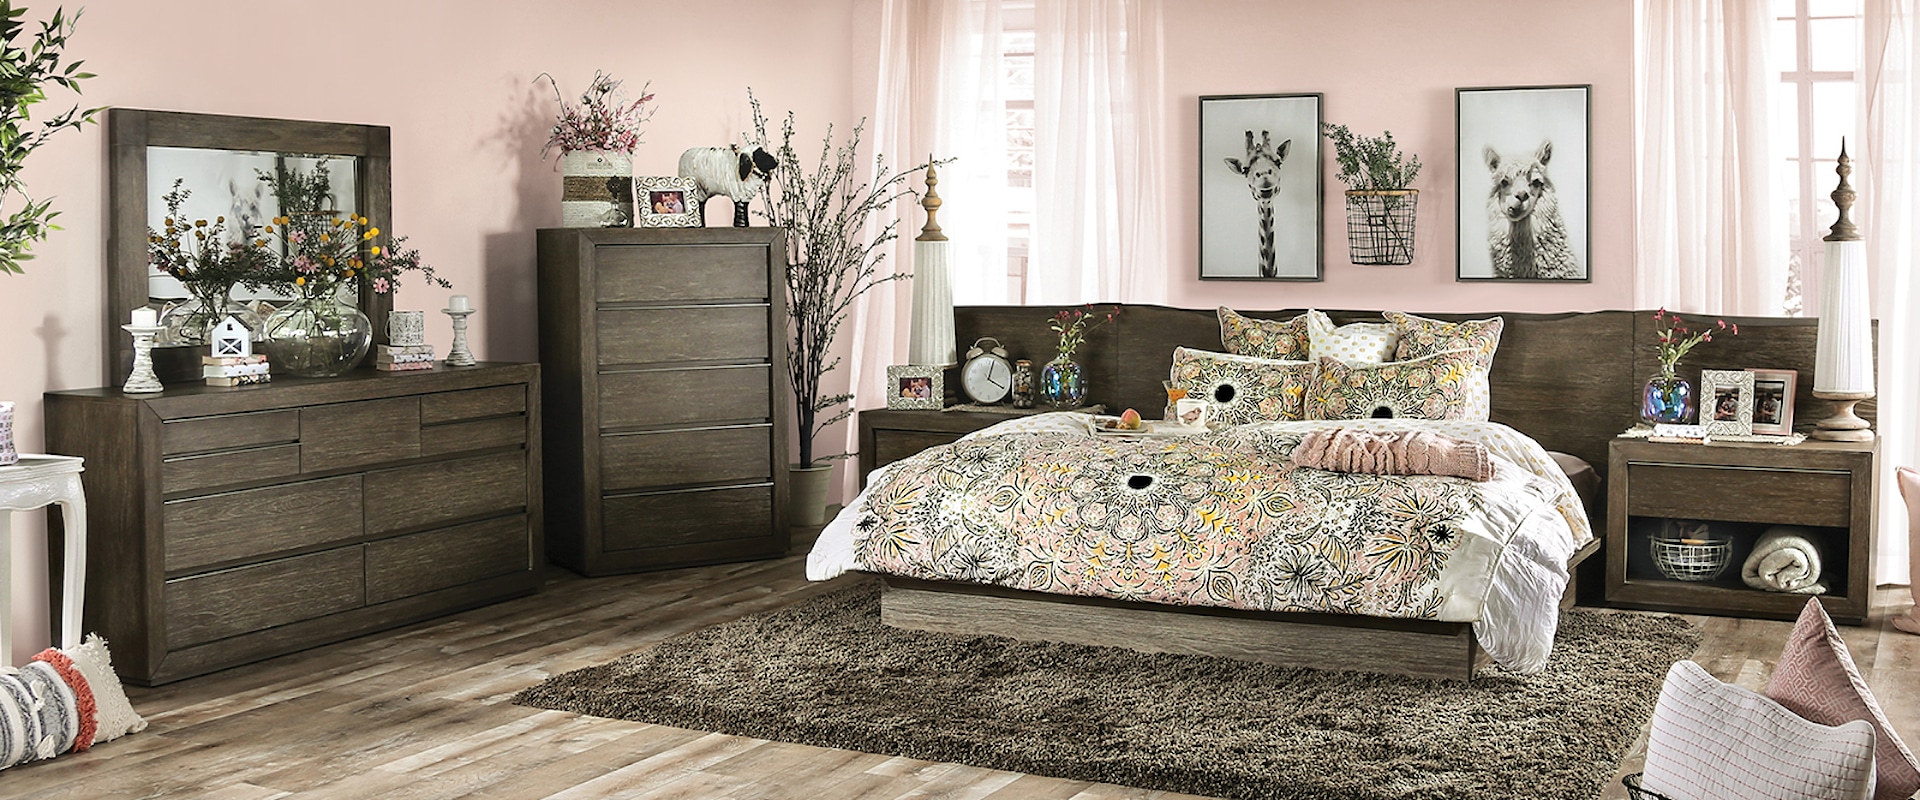 Transitional 5-Piece Queen Bedroom Set with Two Nightstands and Panels